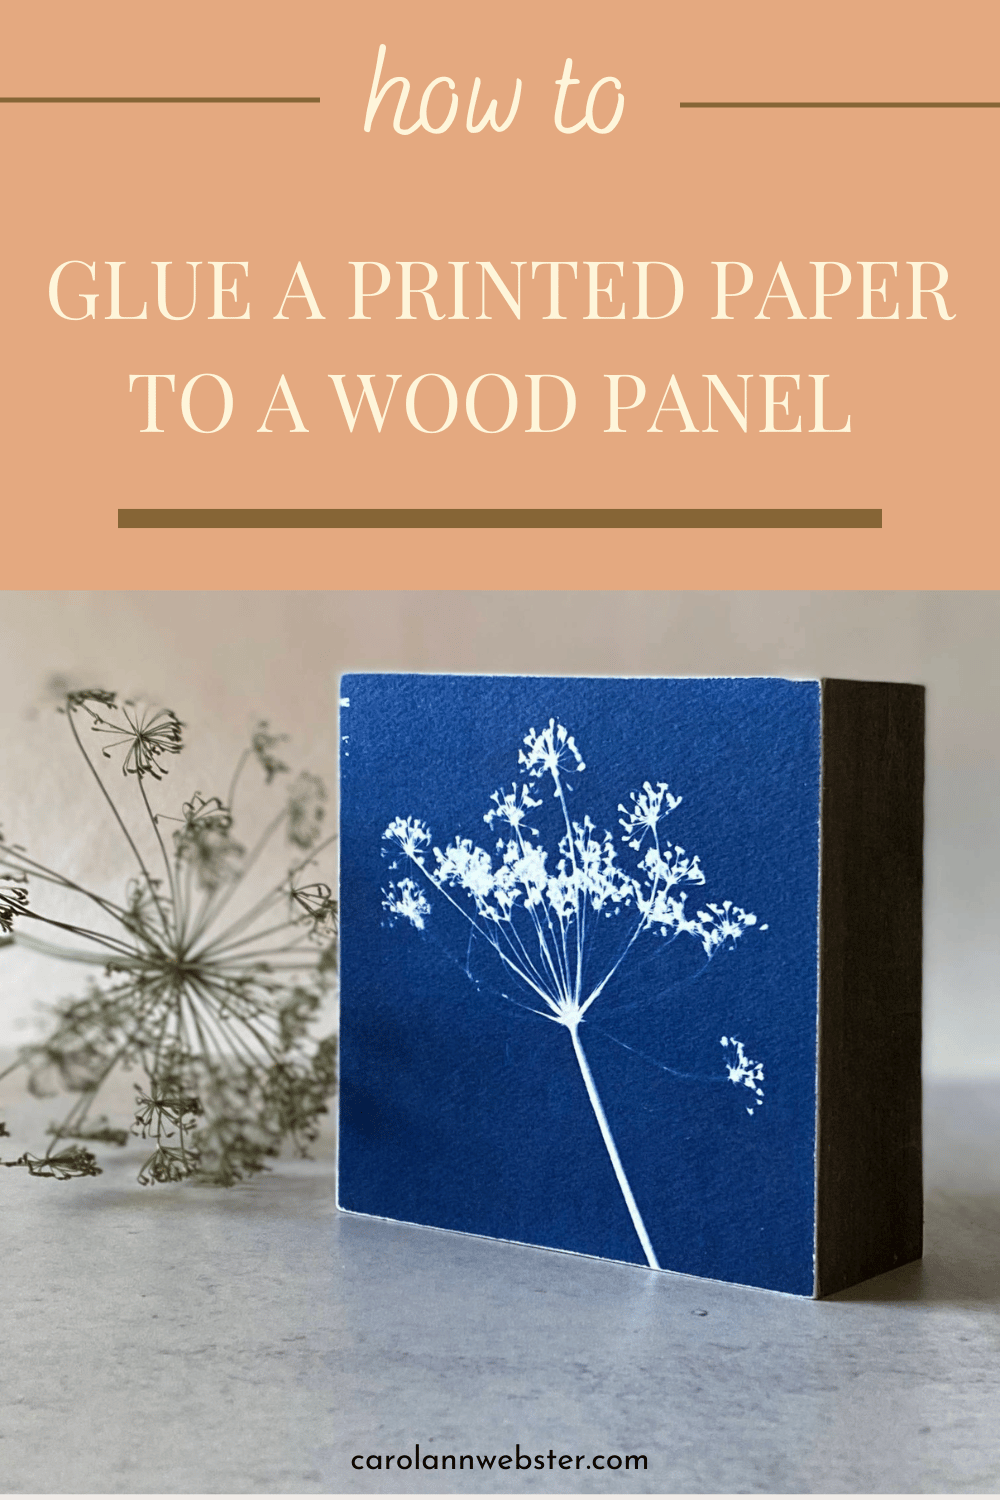 How to Glue Printed Paper to a Wood Panel — carol ann webster